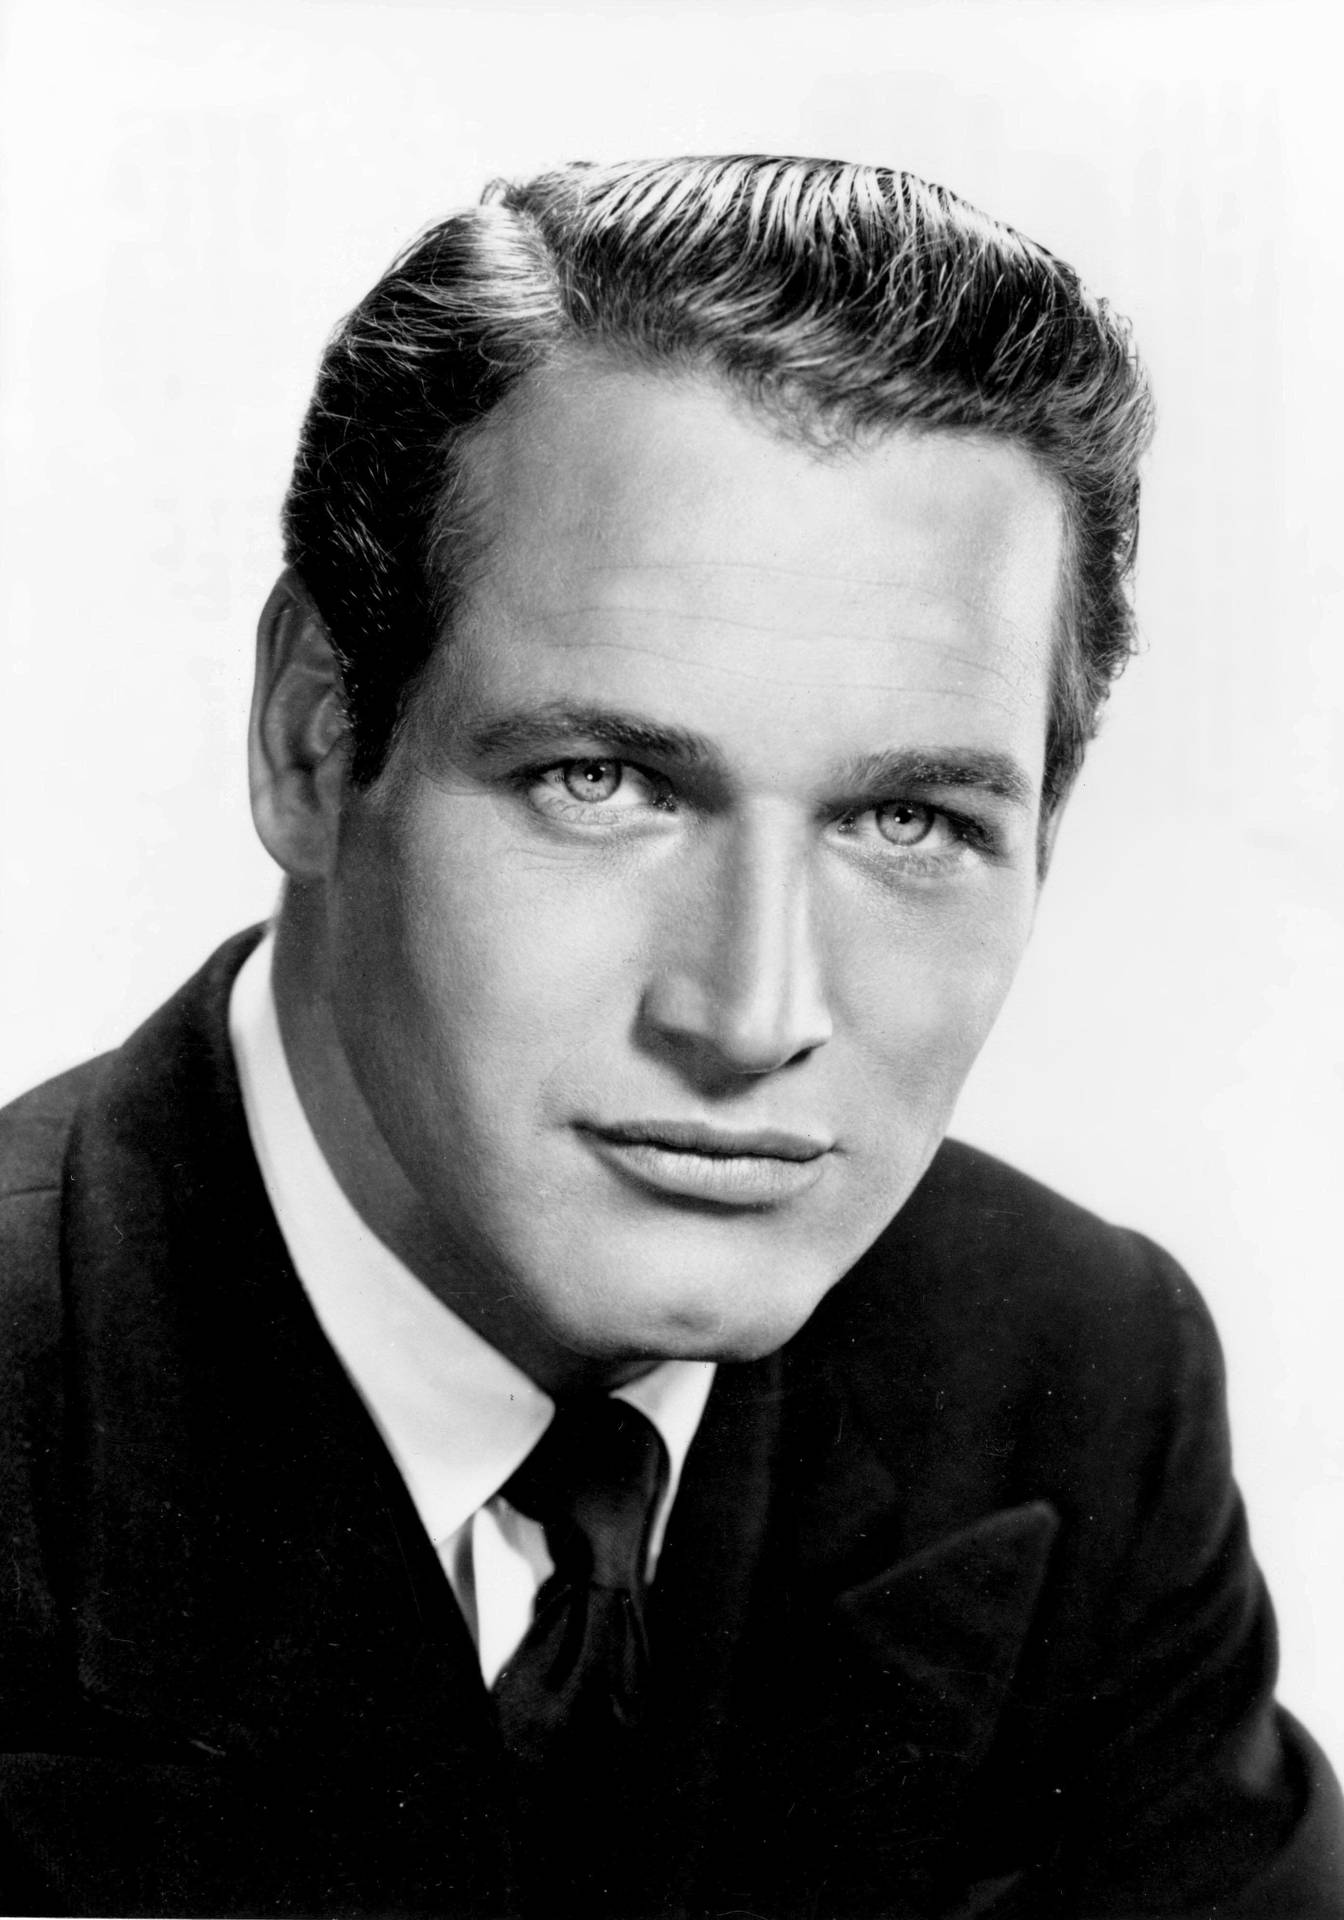 Paul Newman Revered Hairstyle Wallpaper